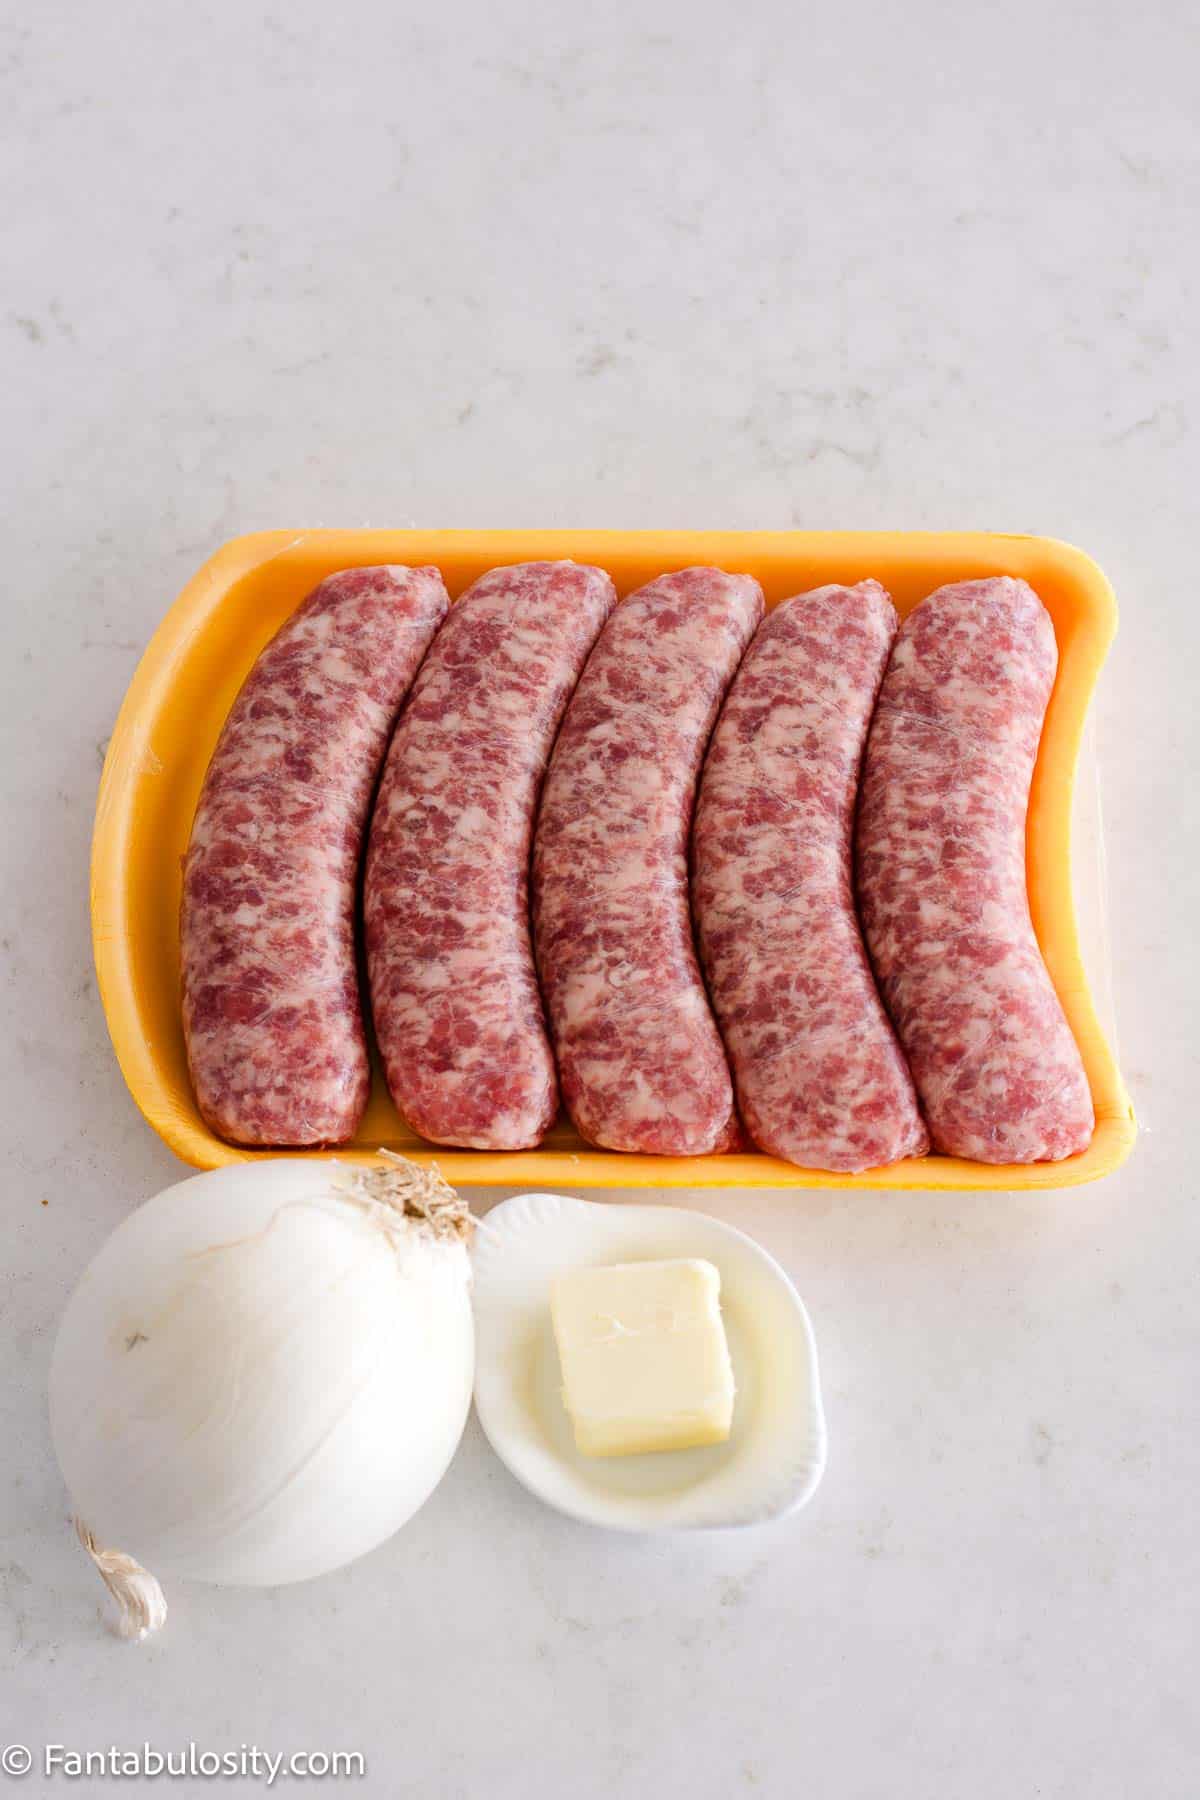 Raw, uncooked brats, sitting next to white onion and butter.